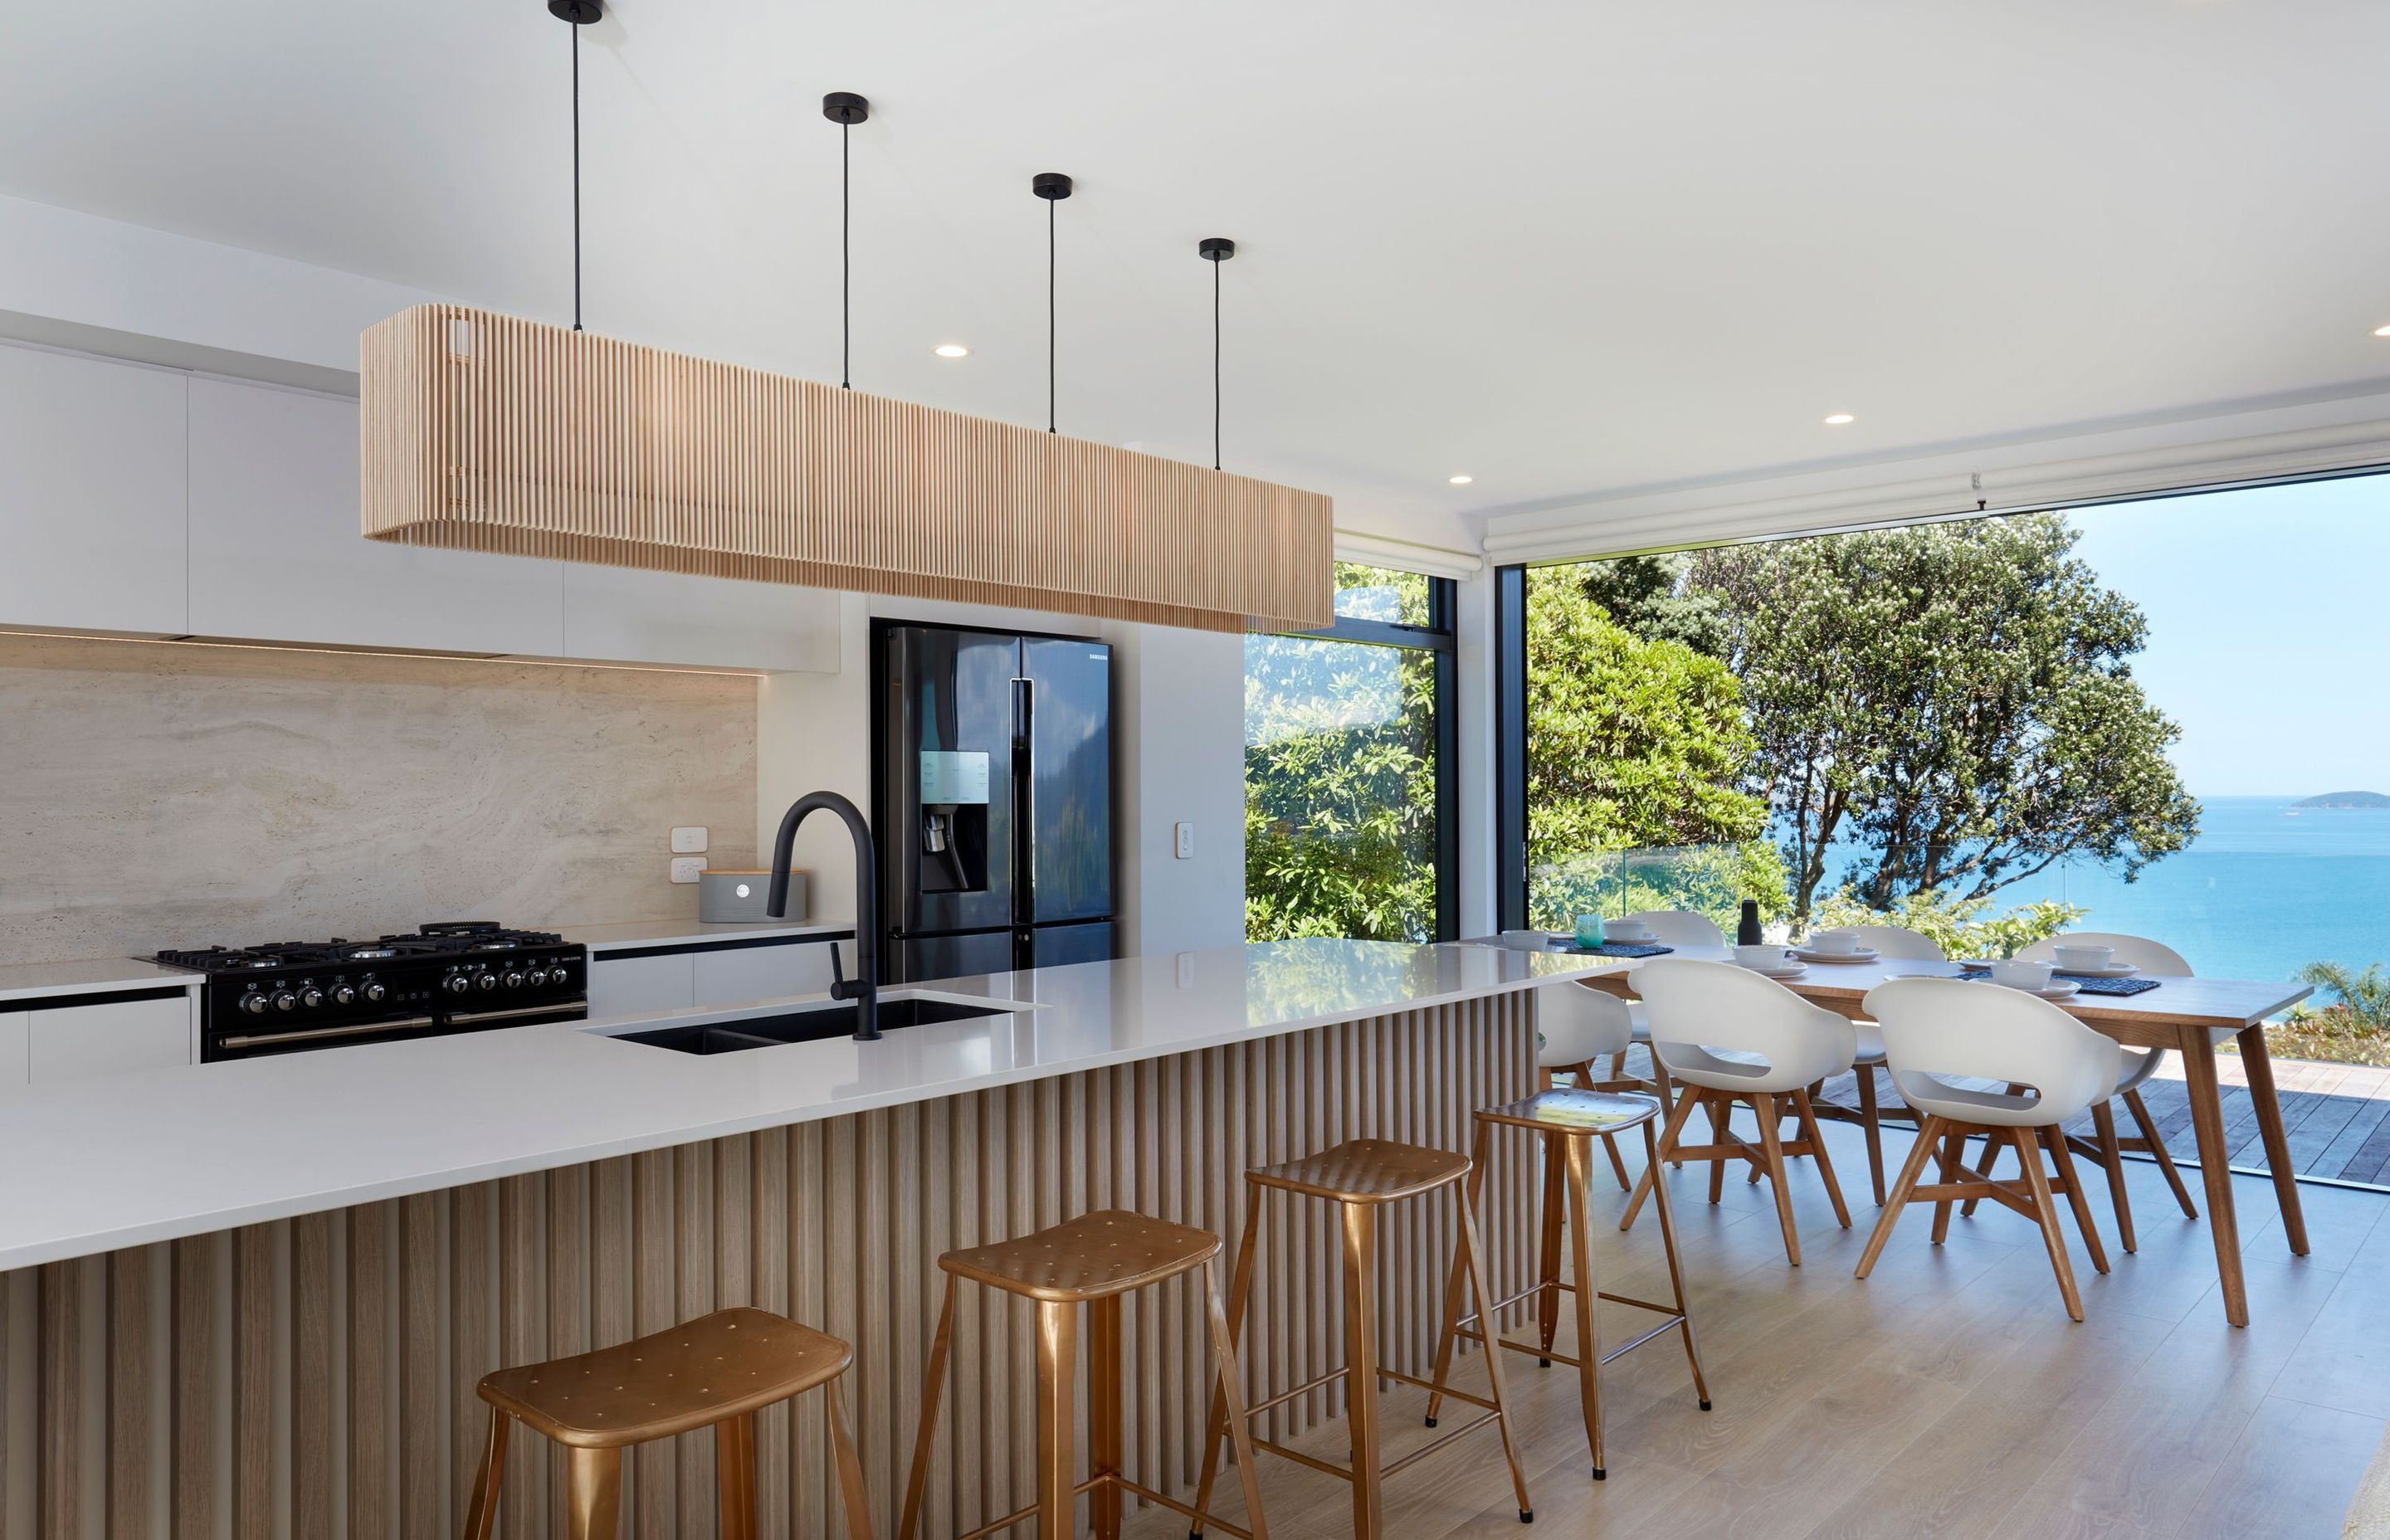 The team at Hostess Kitchens in the Waikato helped the owners with the design of their kitchen, which features a beautifully minimal Greens Luxe pull-out sink mixer. A Frankie Oak dining table from A&amp;C Homestore allows a primo view across the ocean du